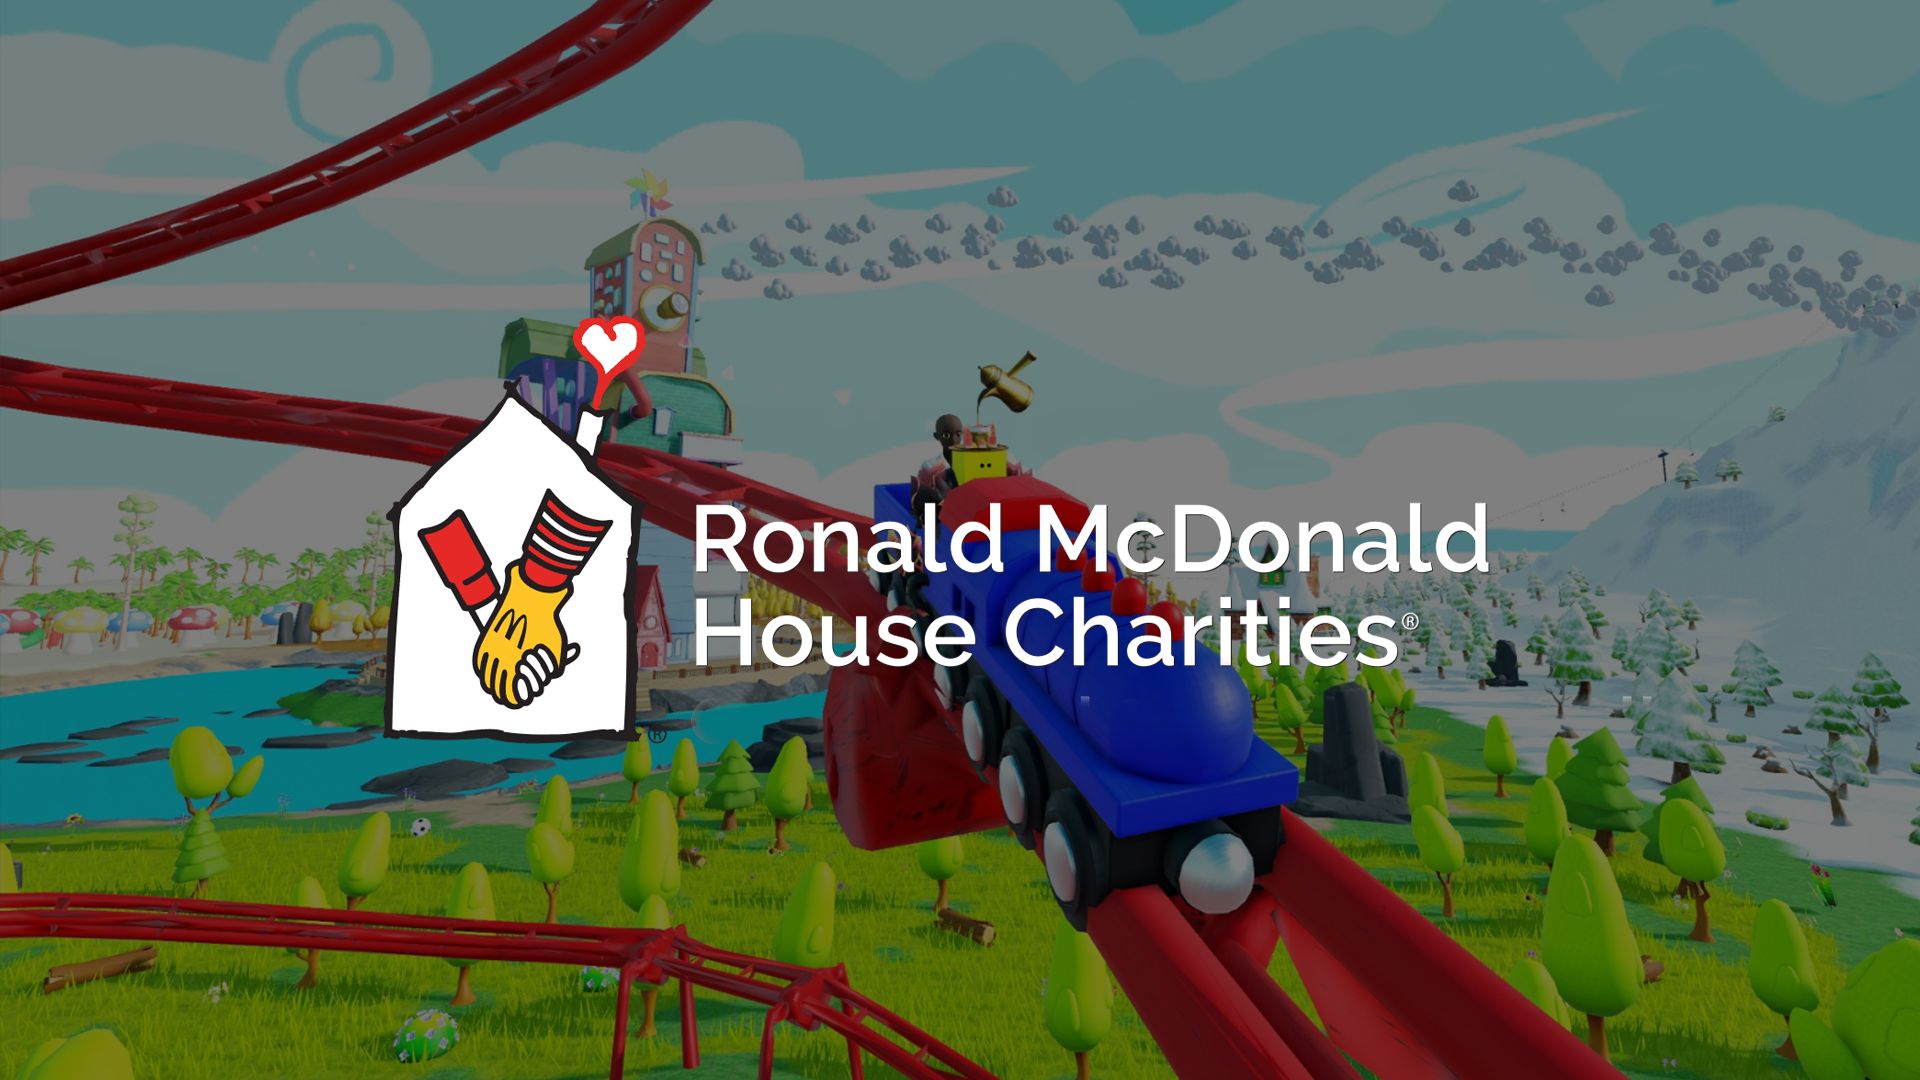 Ronald McDonald House: The national omnichannel campaign